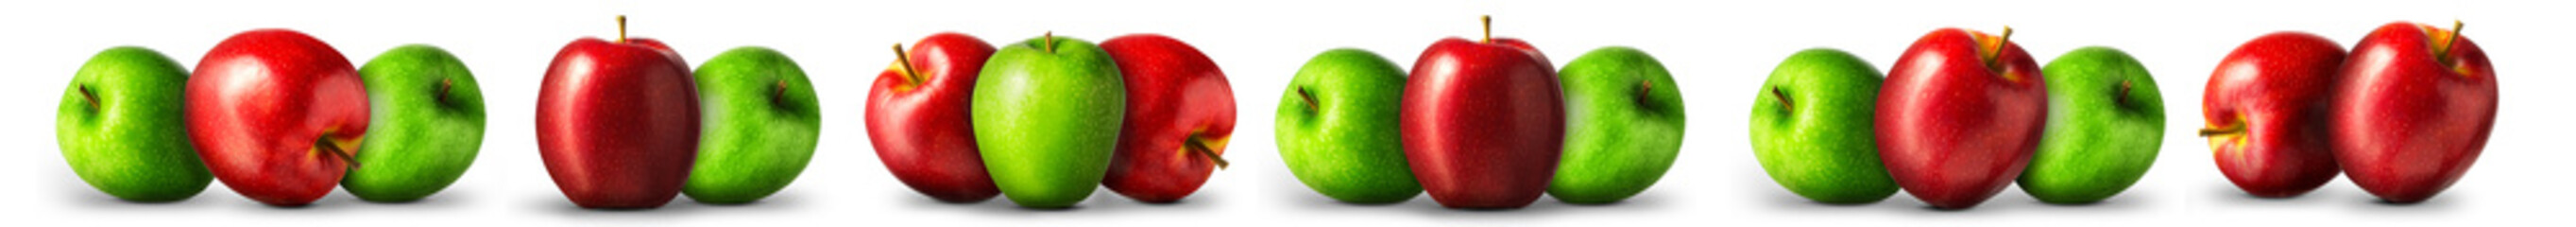 Group of red and green apples on white background